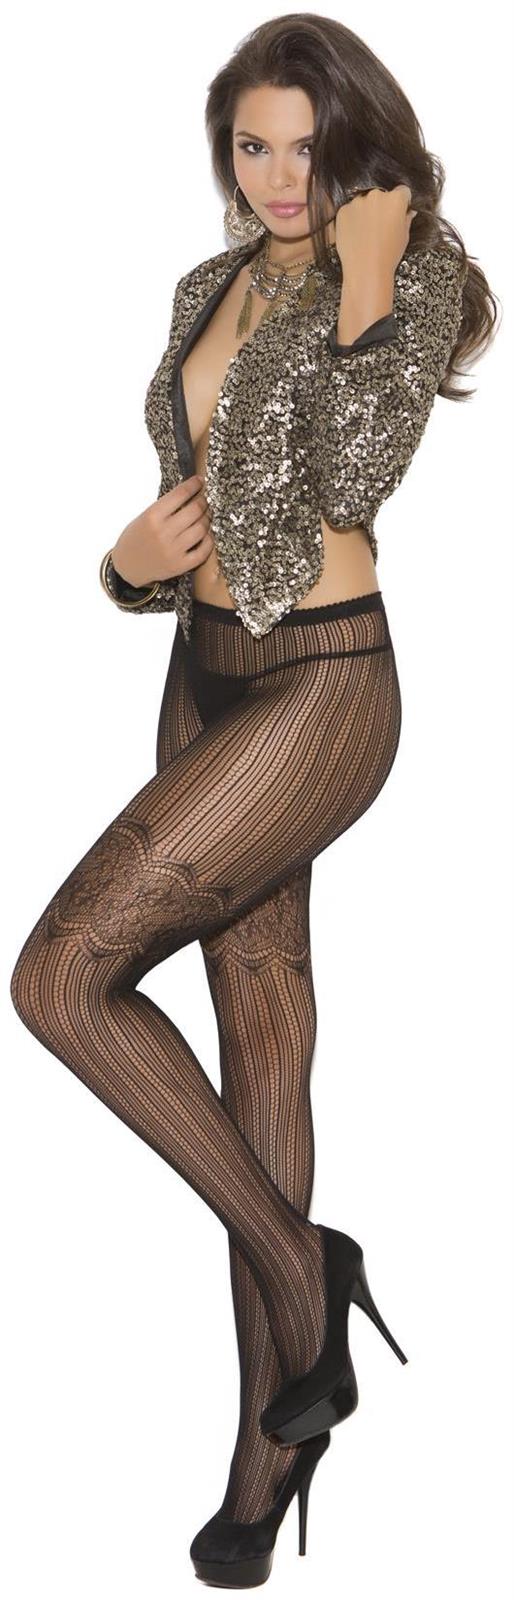 Elegant Moments Women's Vertical Stripe Pantyhose with Scroll Detail - BLACK - One Size